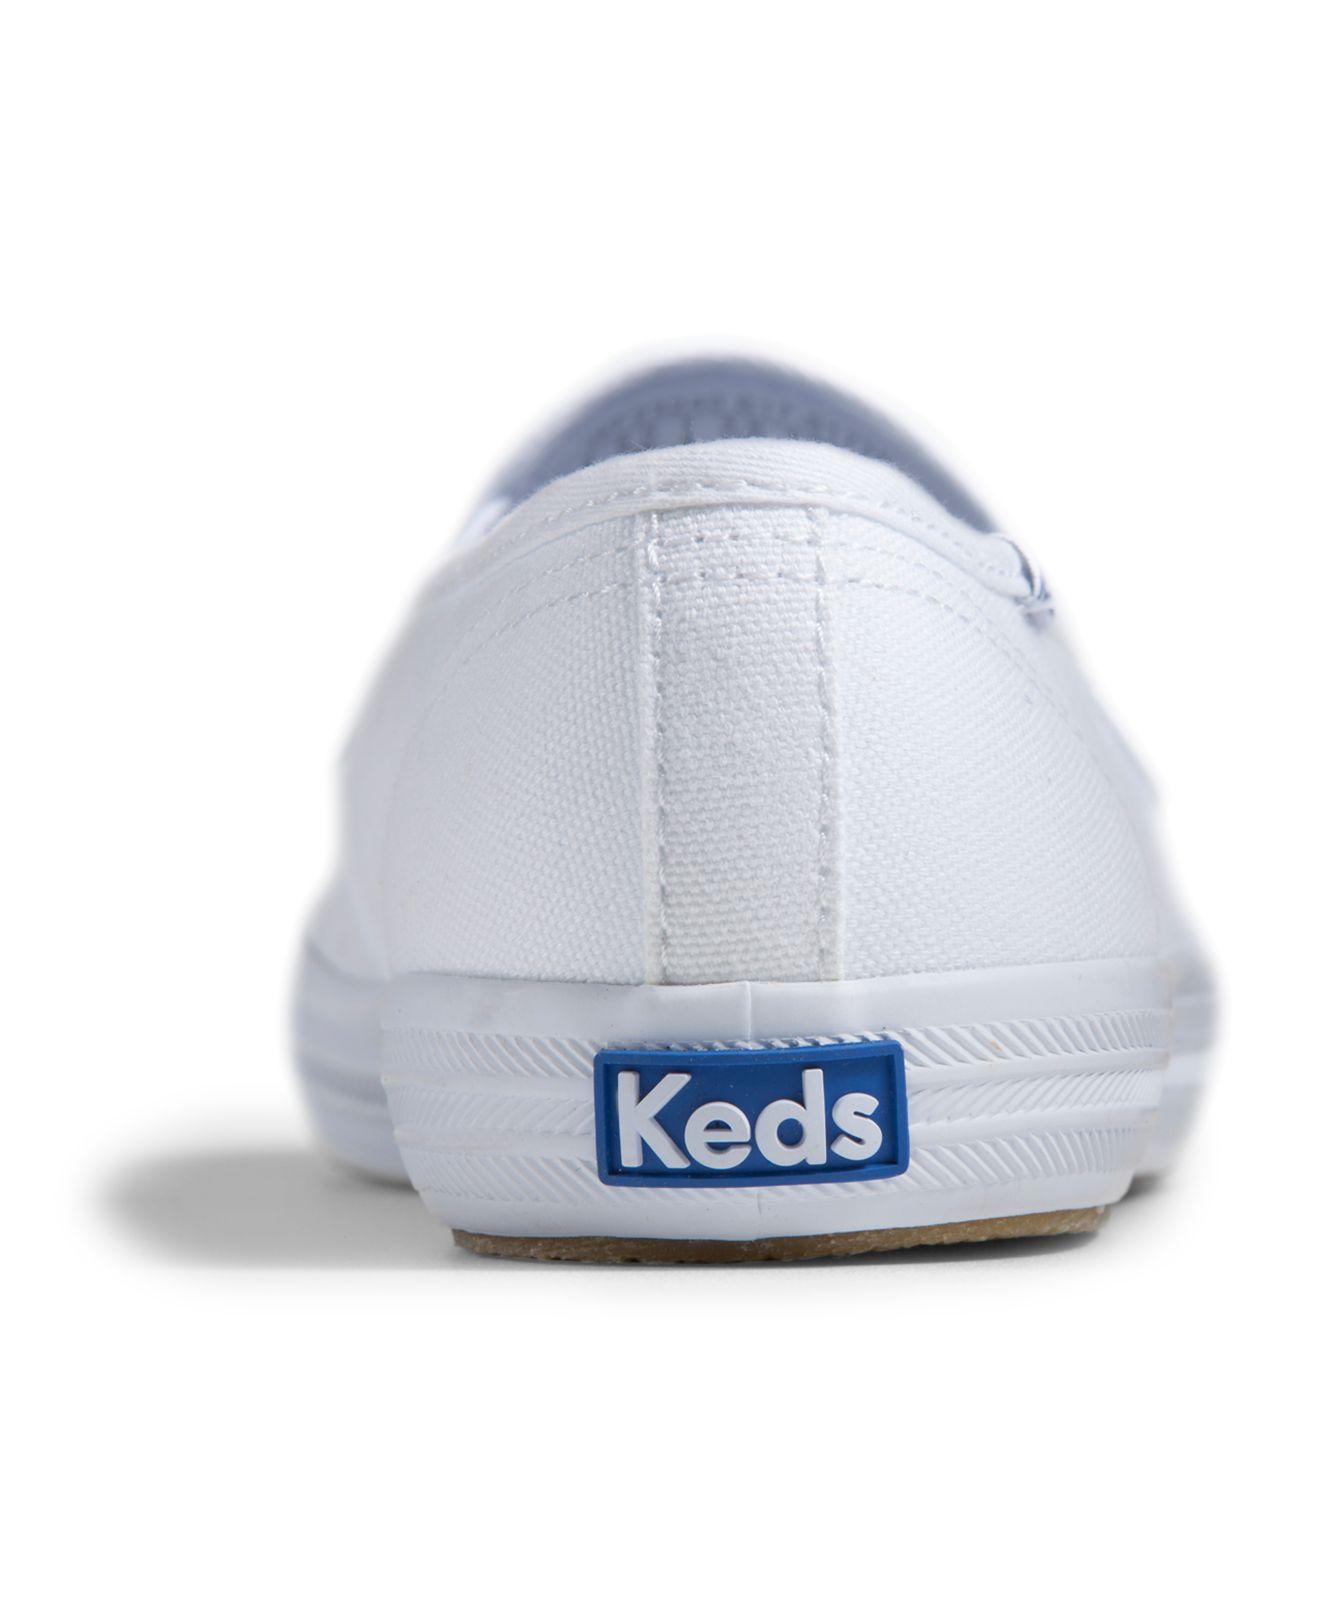 Keds Champion Slip On Canvas Sneakers in White - Lyst